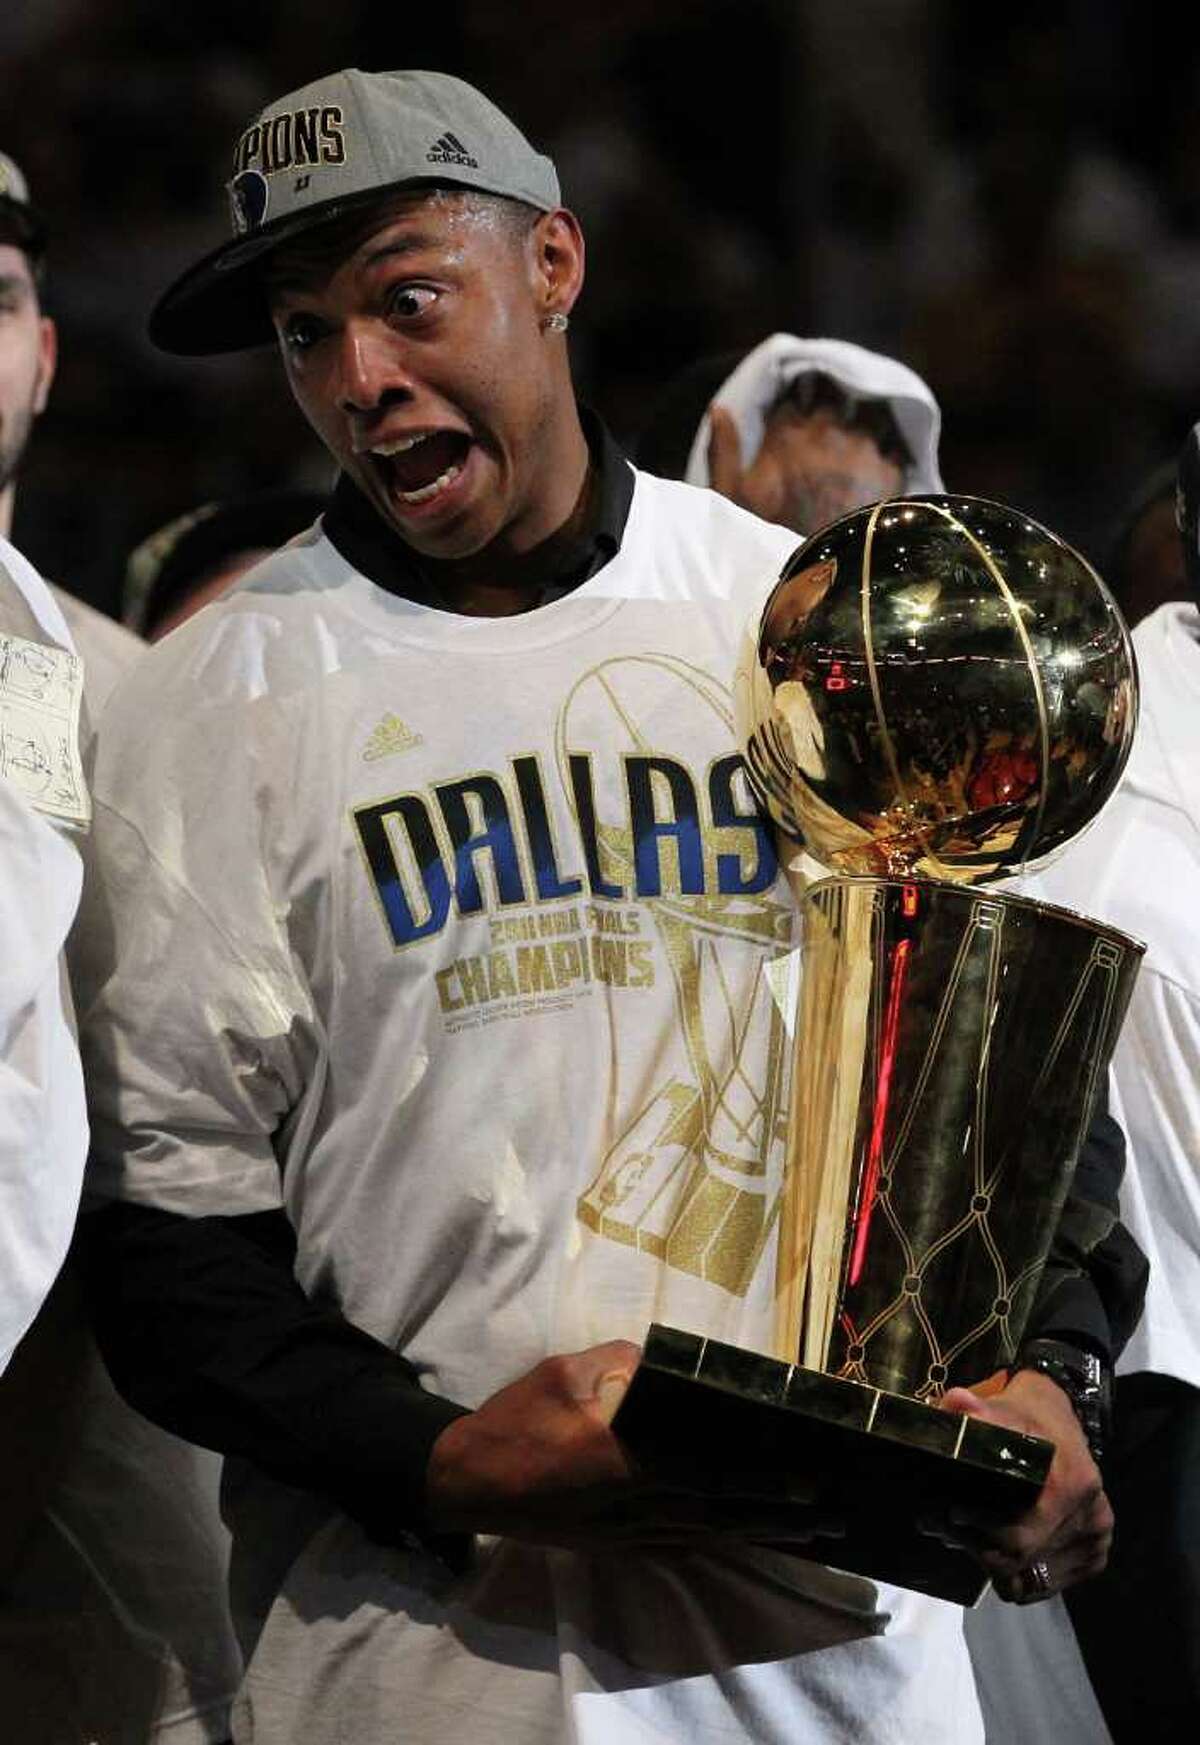 Despite missing the series due to a season-ending knee injury in January, Caron Butler earned his first NBA championship ring with the Dallas Mavericks. Above, he celebrates with the Larry O'Brien trophy after the Mavericks won 105-95 against the Miami Heat in Game Six of the 2011 NBA Finals at American Airlines Arena on June 12, 2011 in Miami, Florida. (Photo by Ronald Martinez/Getty Images)